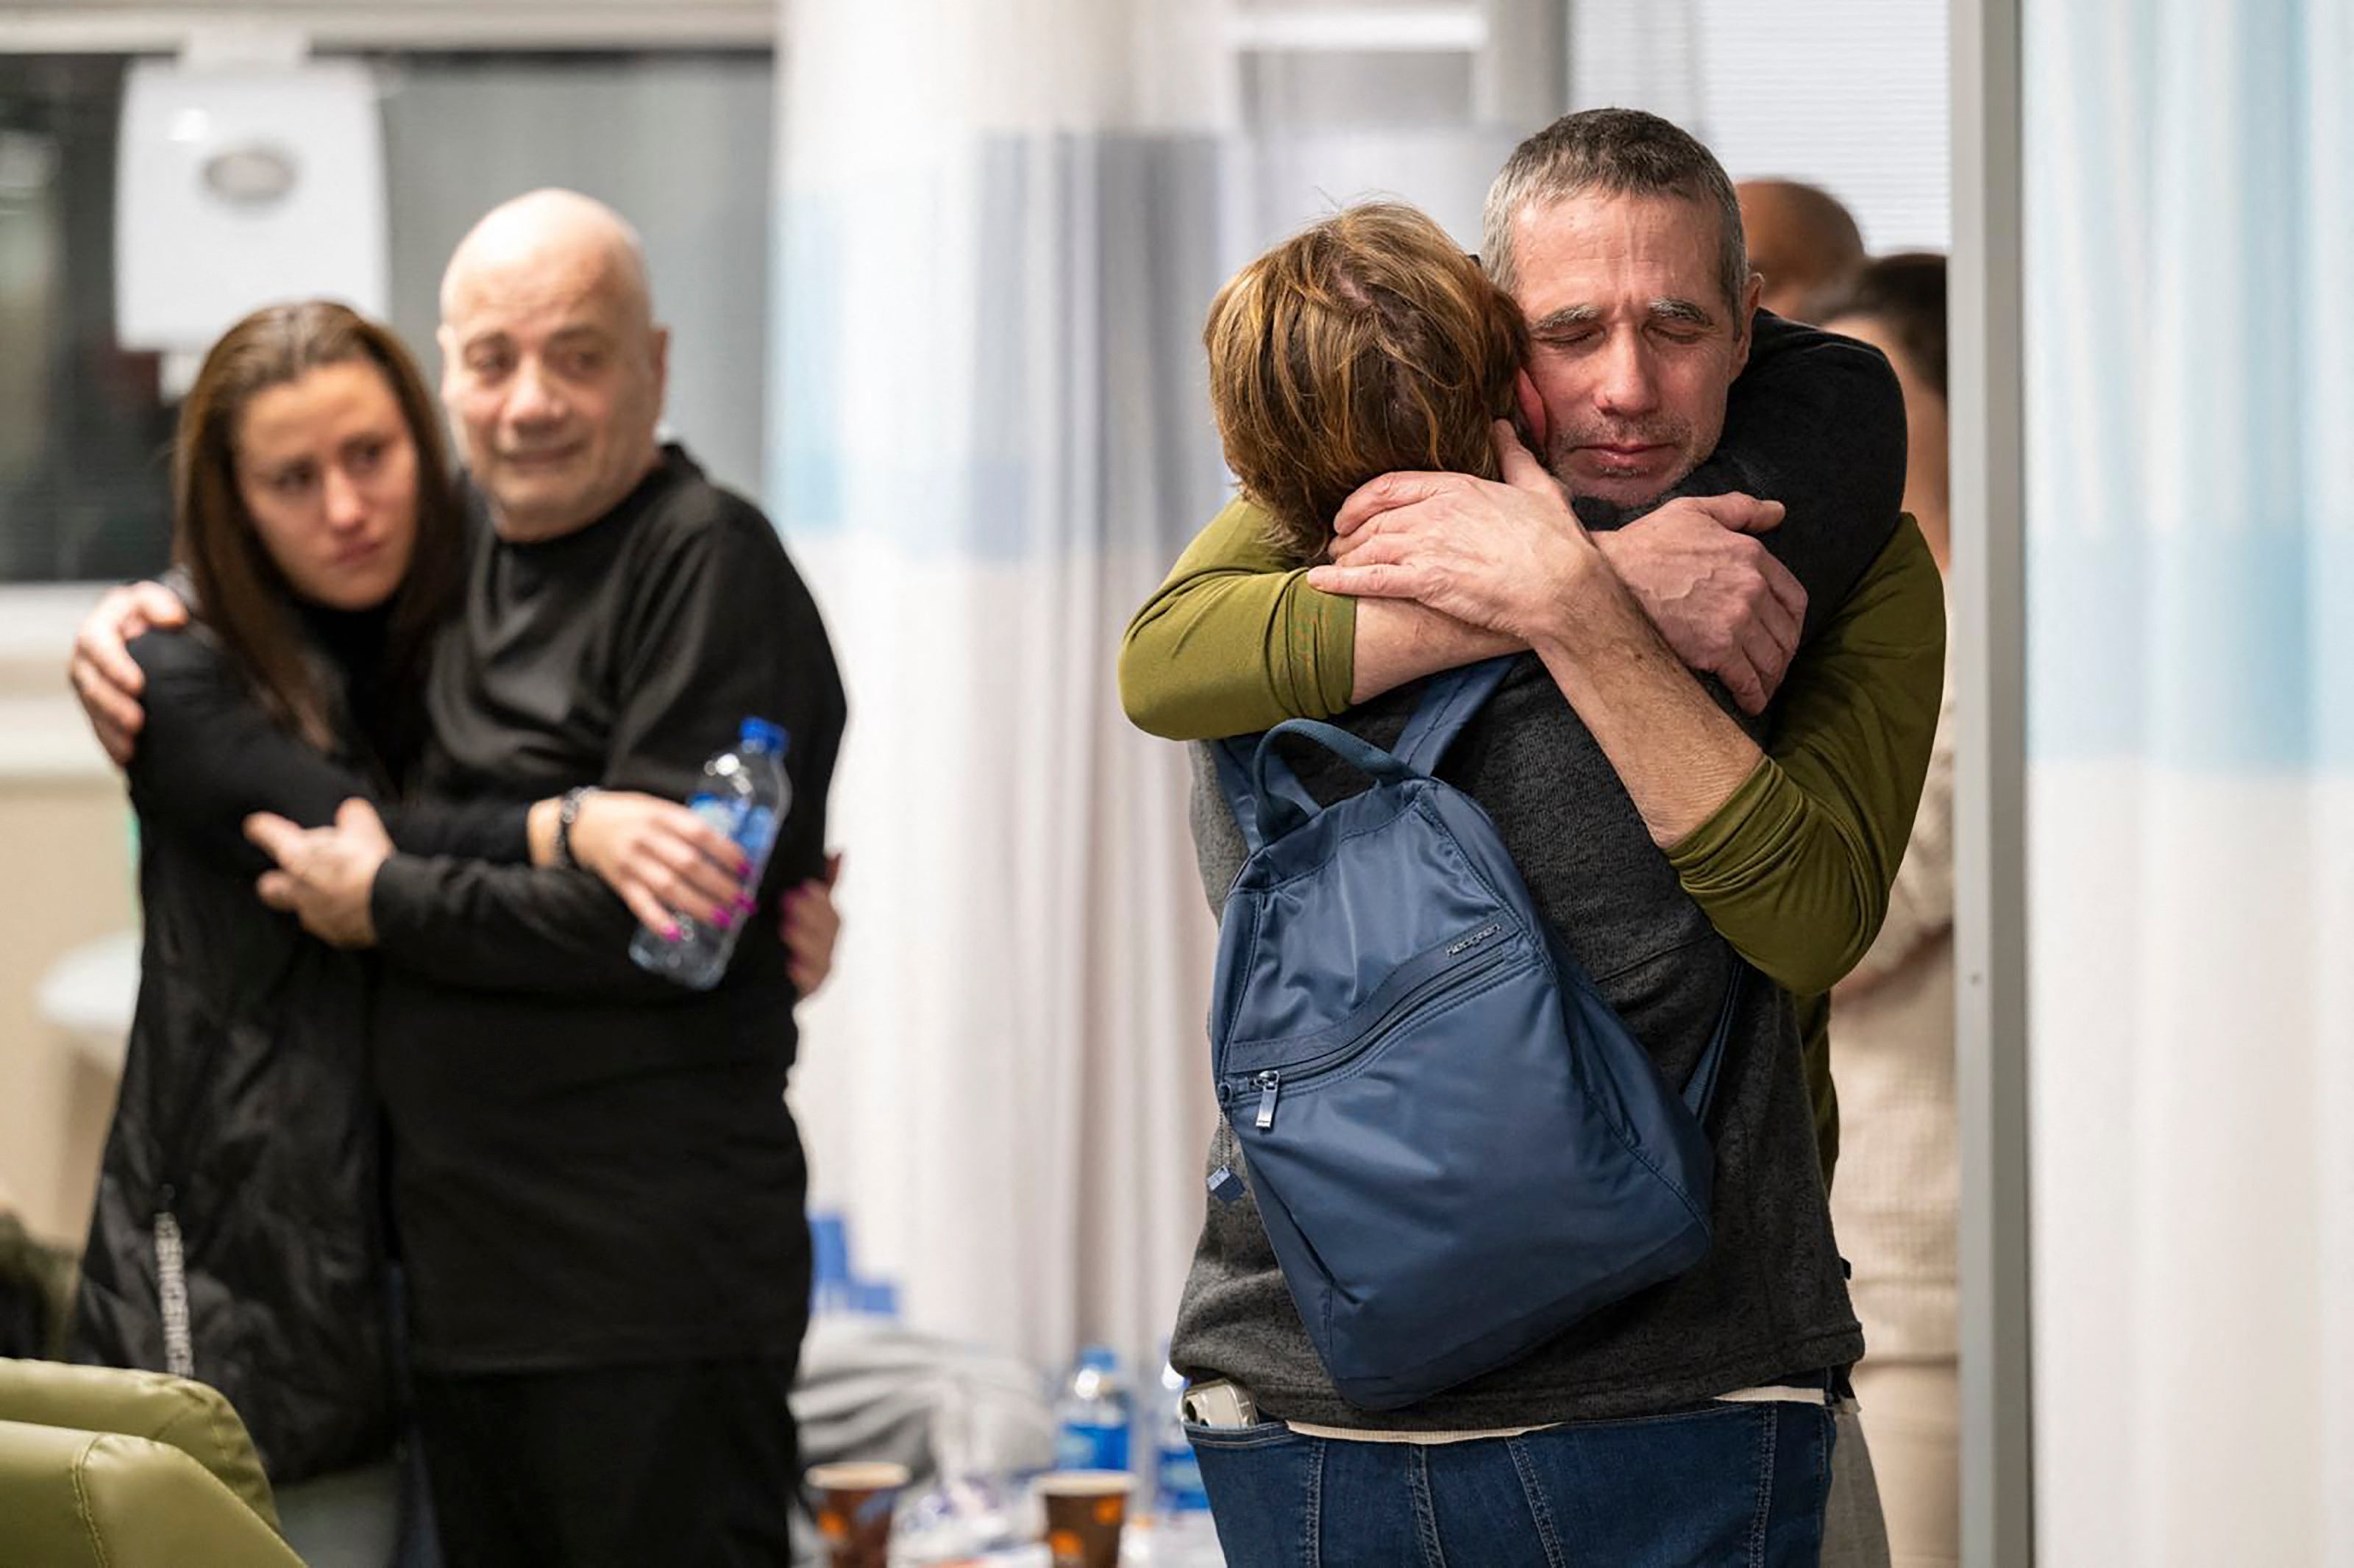 Rescued Israeli-Argentinian hostage Fernando Simon Marman being reunited with his family at the Tel Hashomer Hospital in Ramat Gan